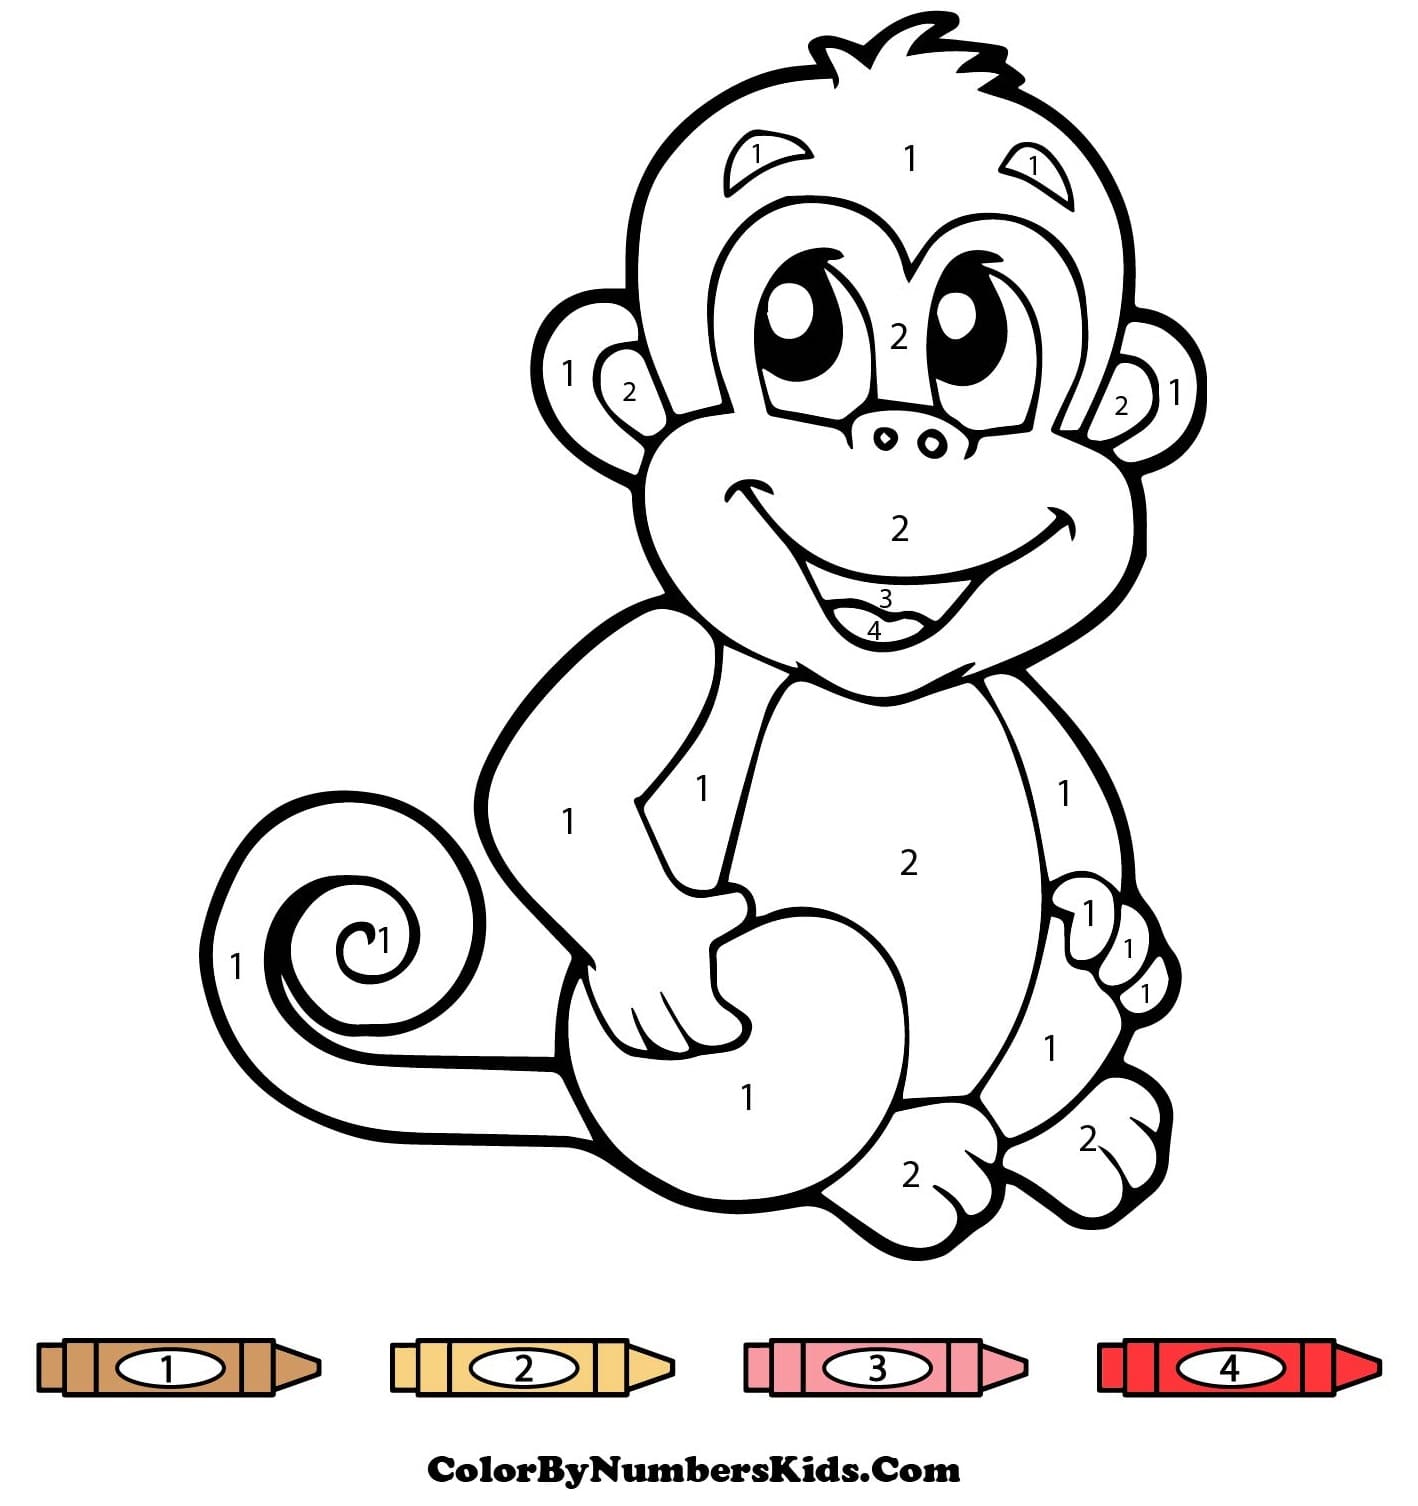 Friendly Monkey Color By Number